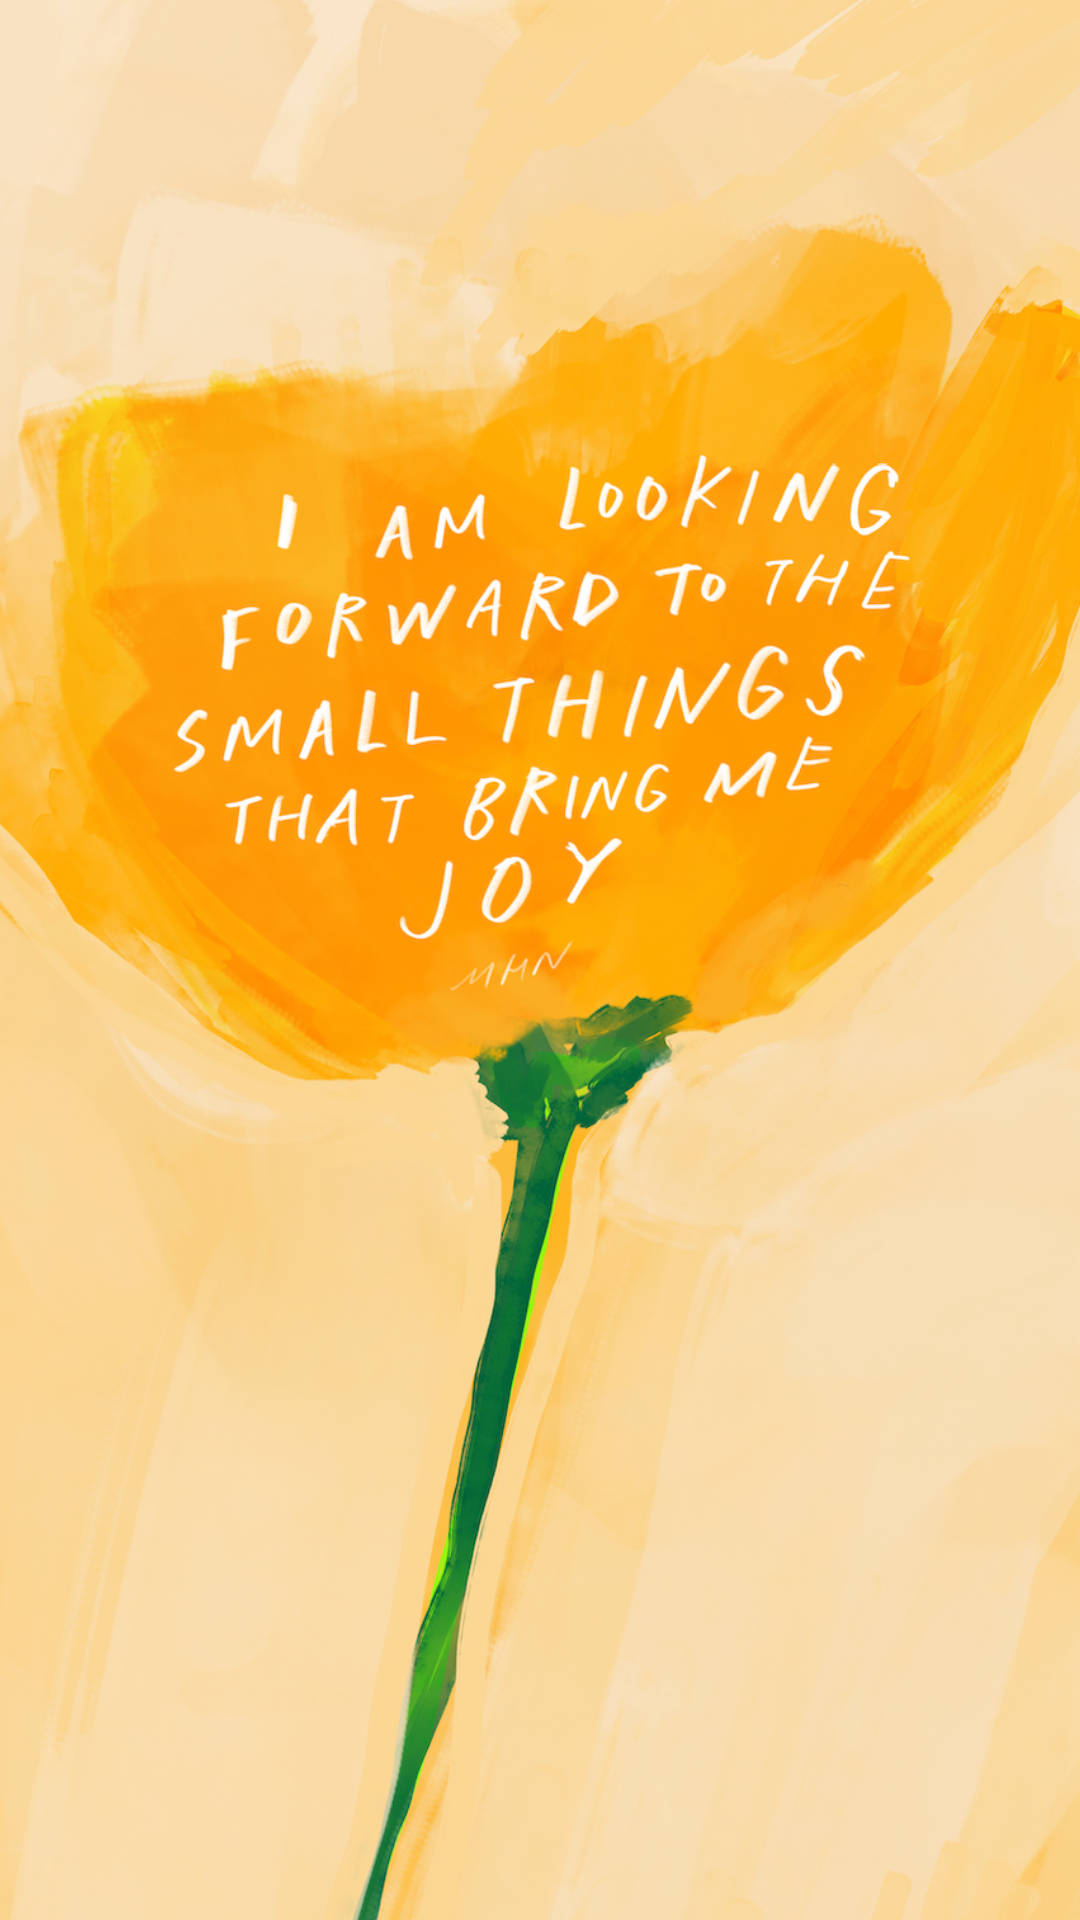 Small Things Joy Affirmation Background